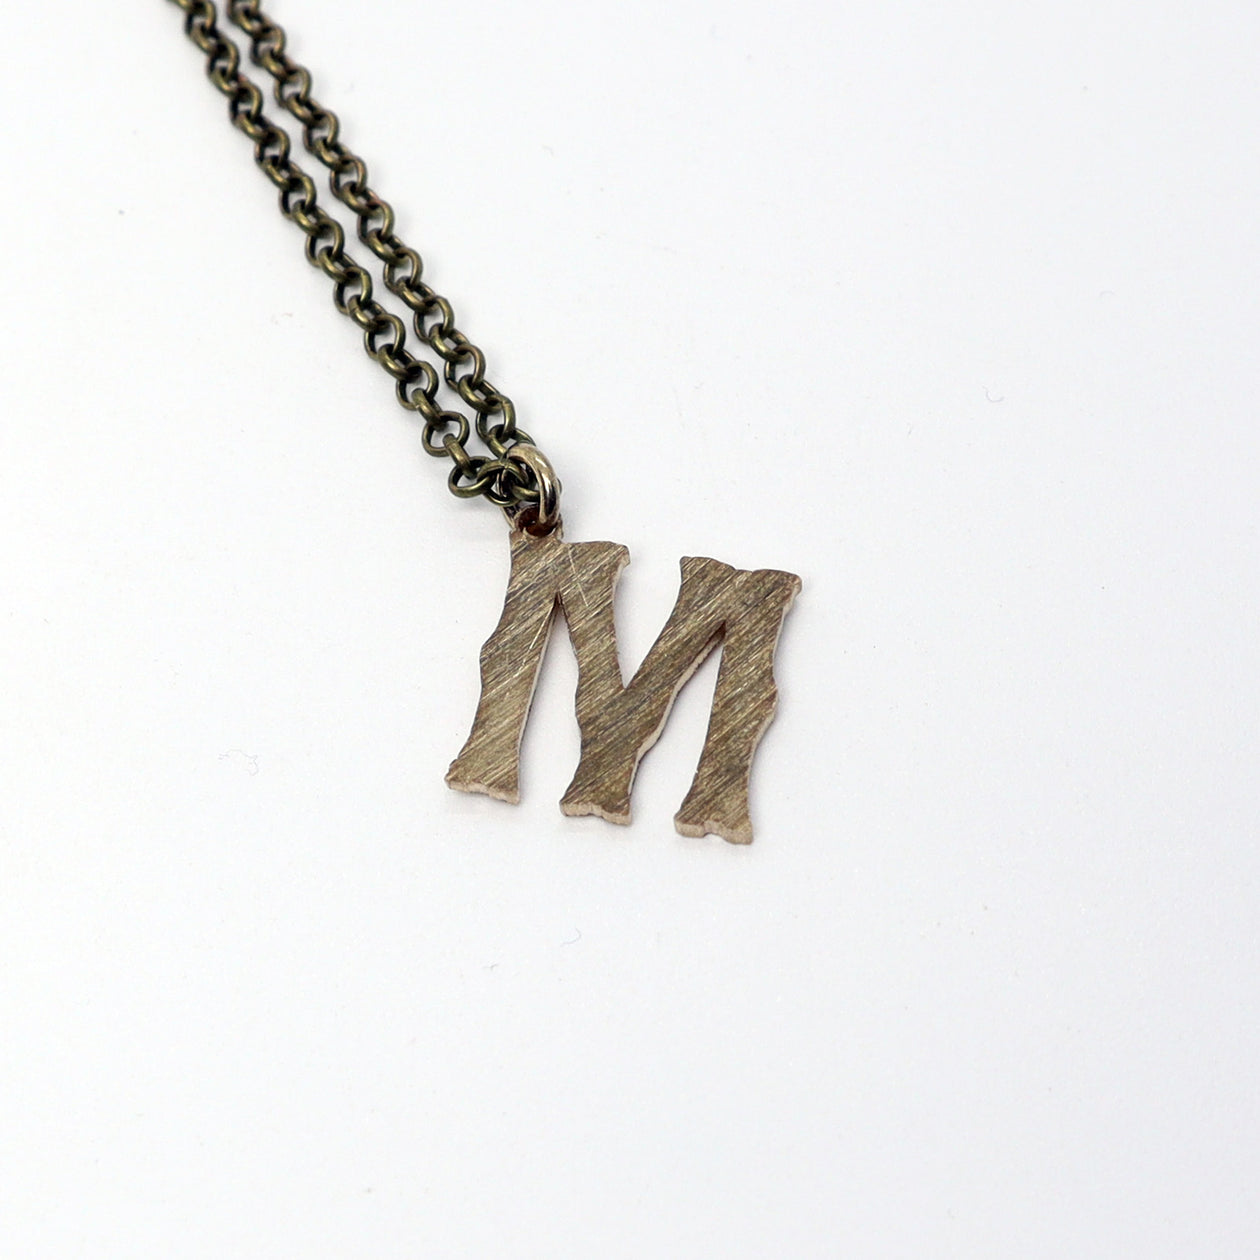 Movements Spencer York M - Reclaimed Cymbal Necklace